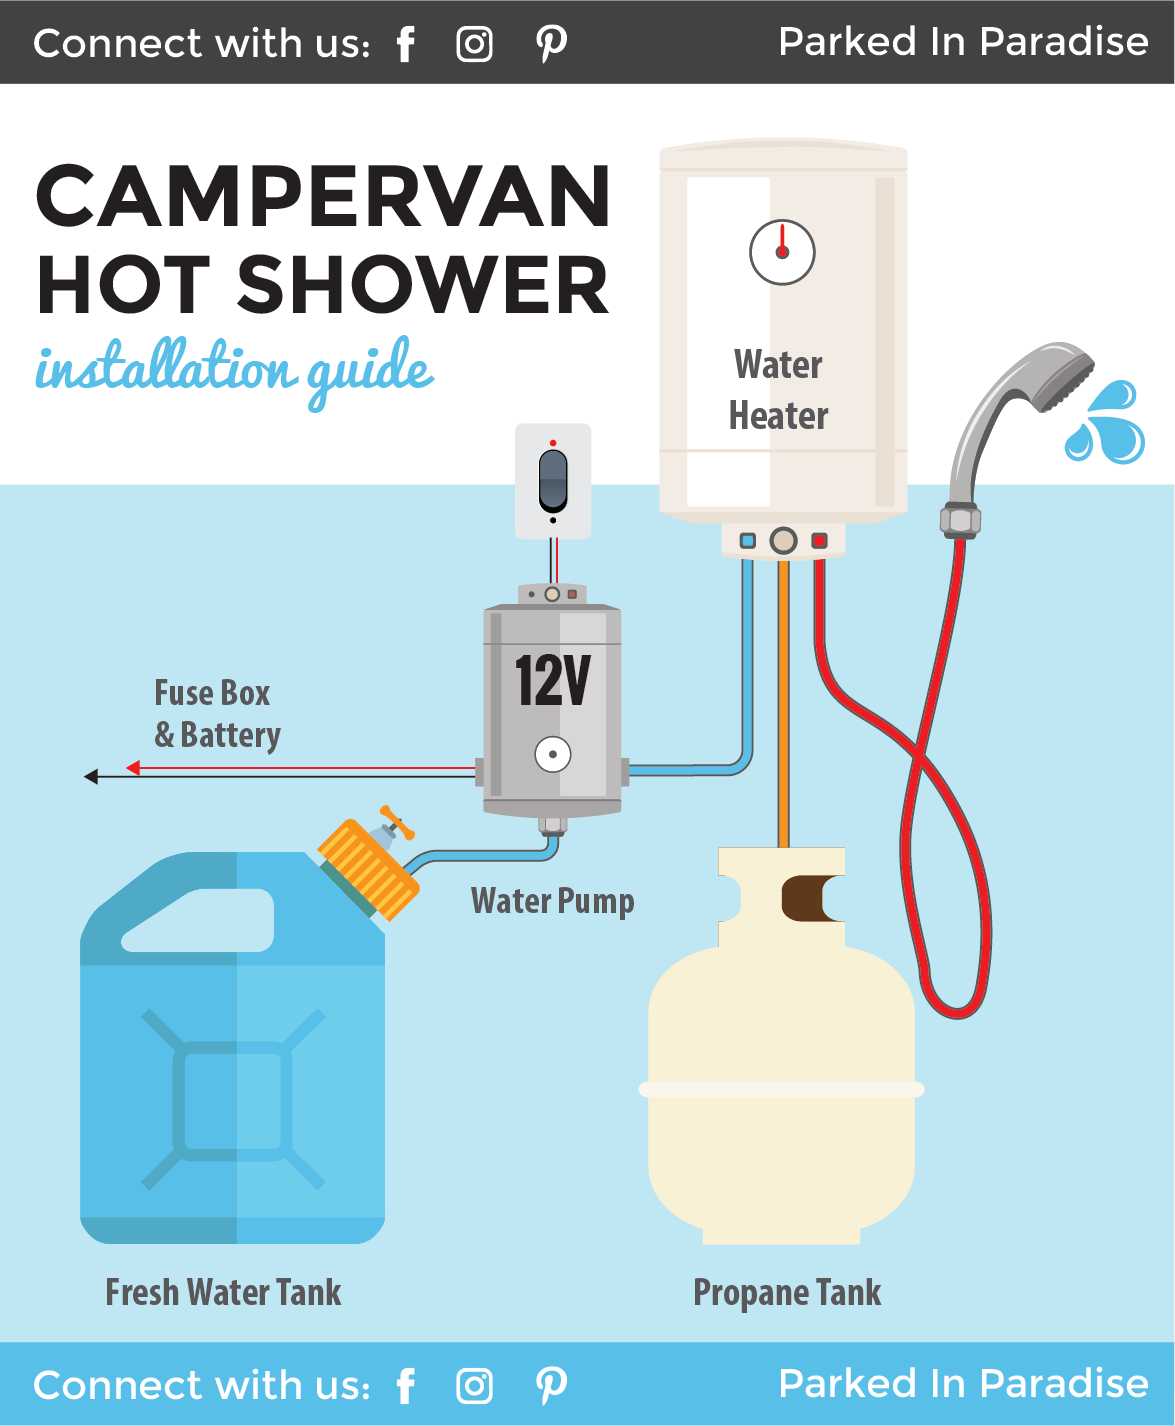 Plumbing diagram for installing a 12v water pump and portable hot water heater